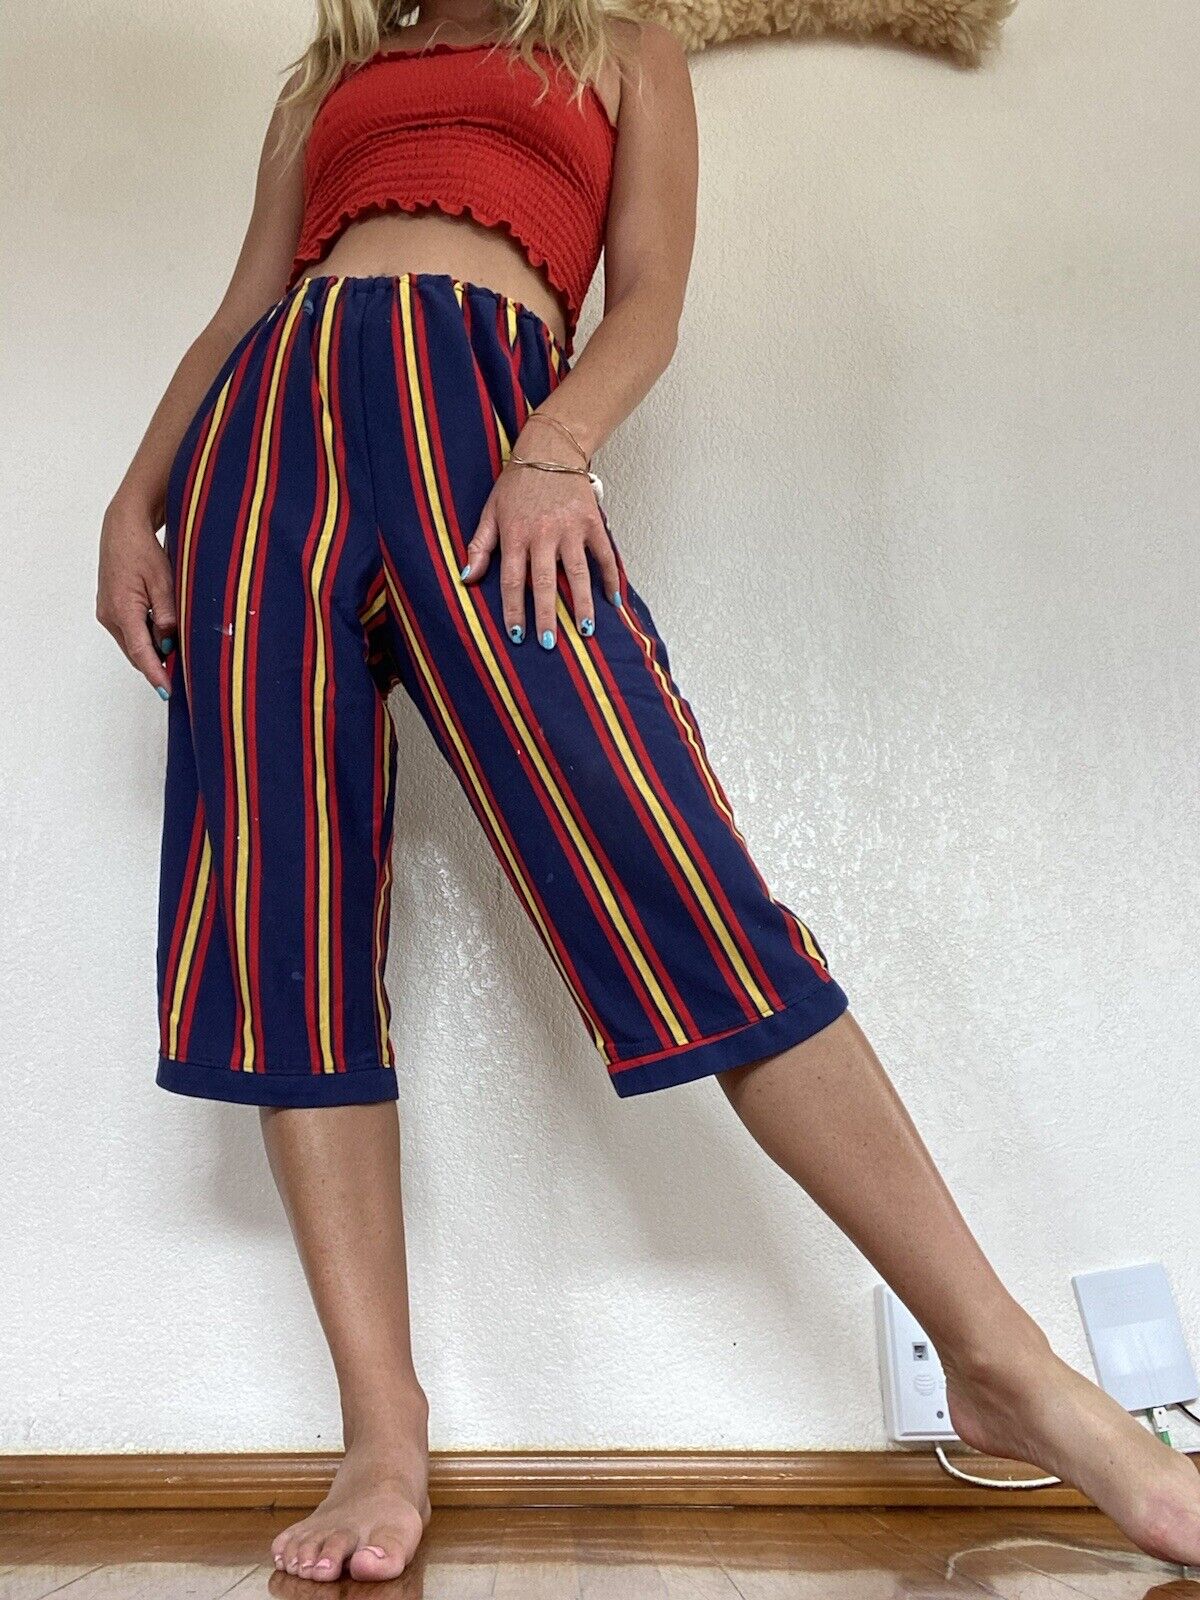 Blue, Yellow, Red Stripe Long Shorts - Unbranded - Size Medium